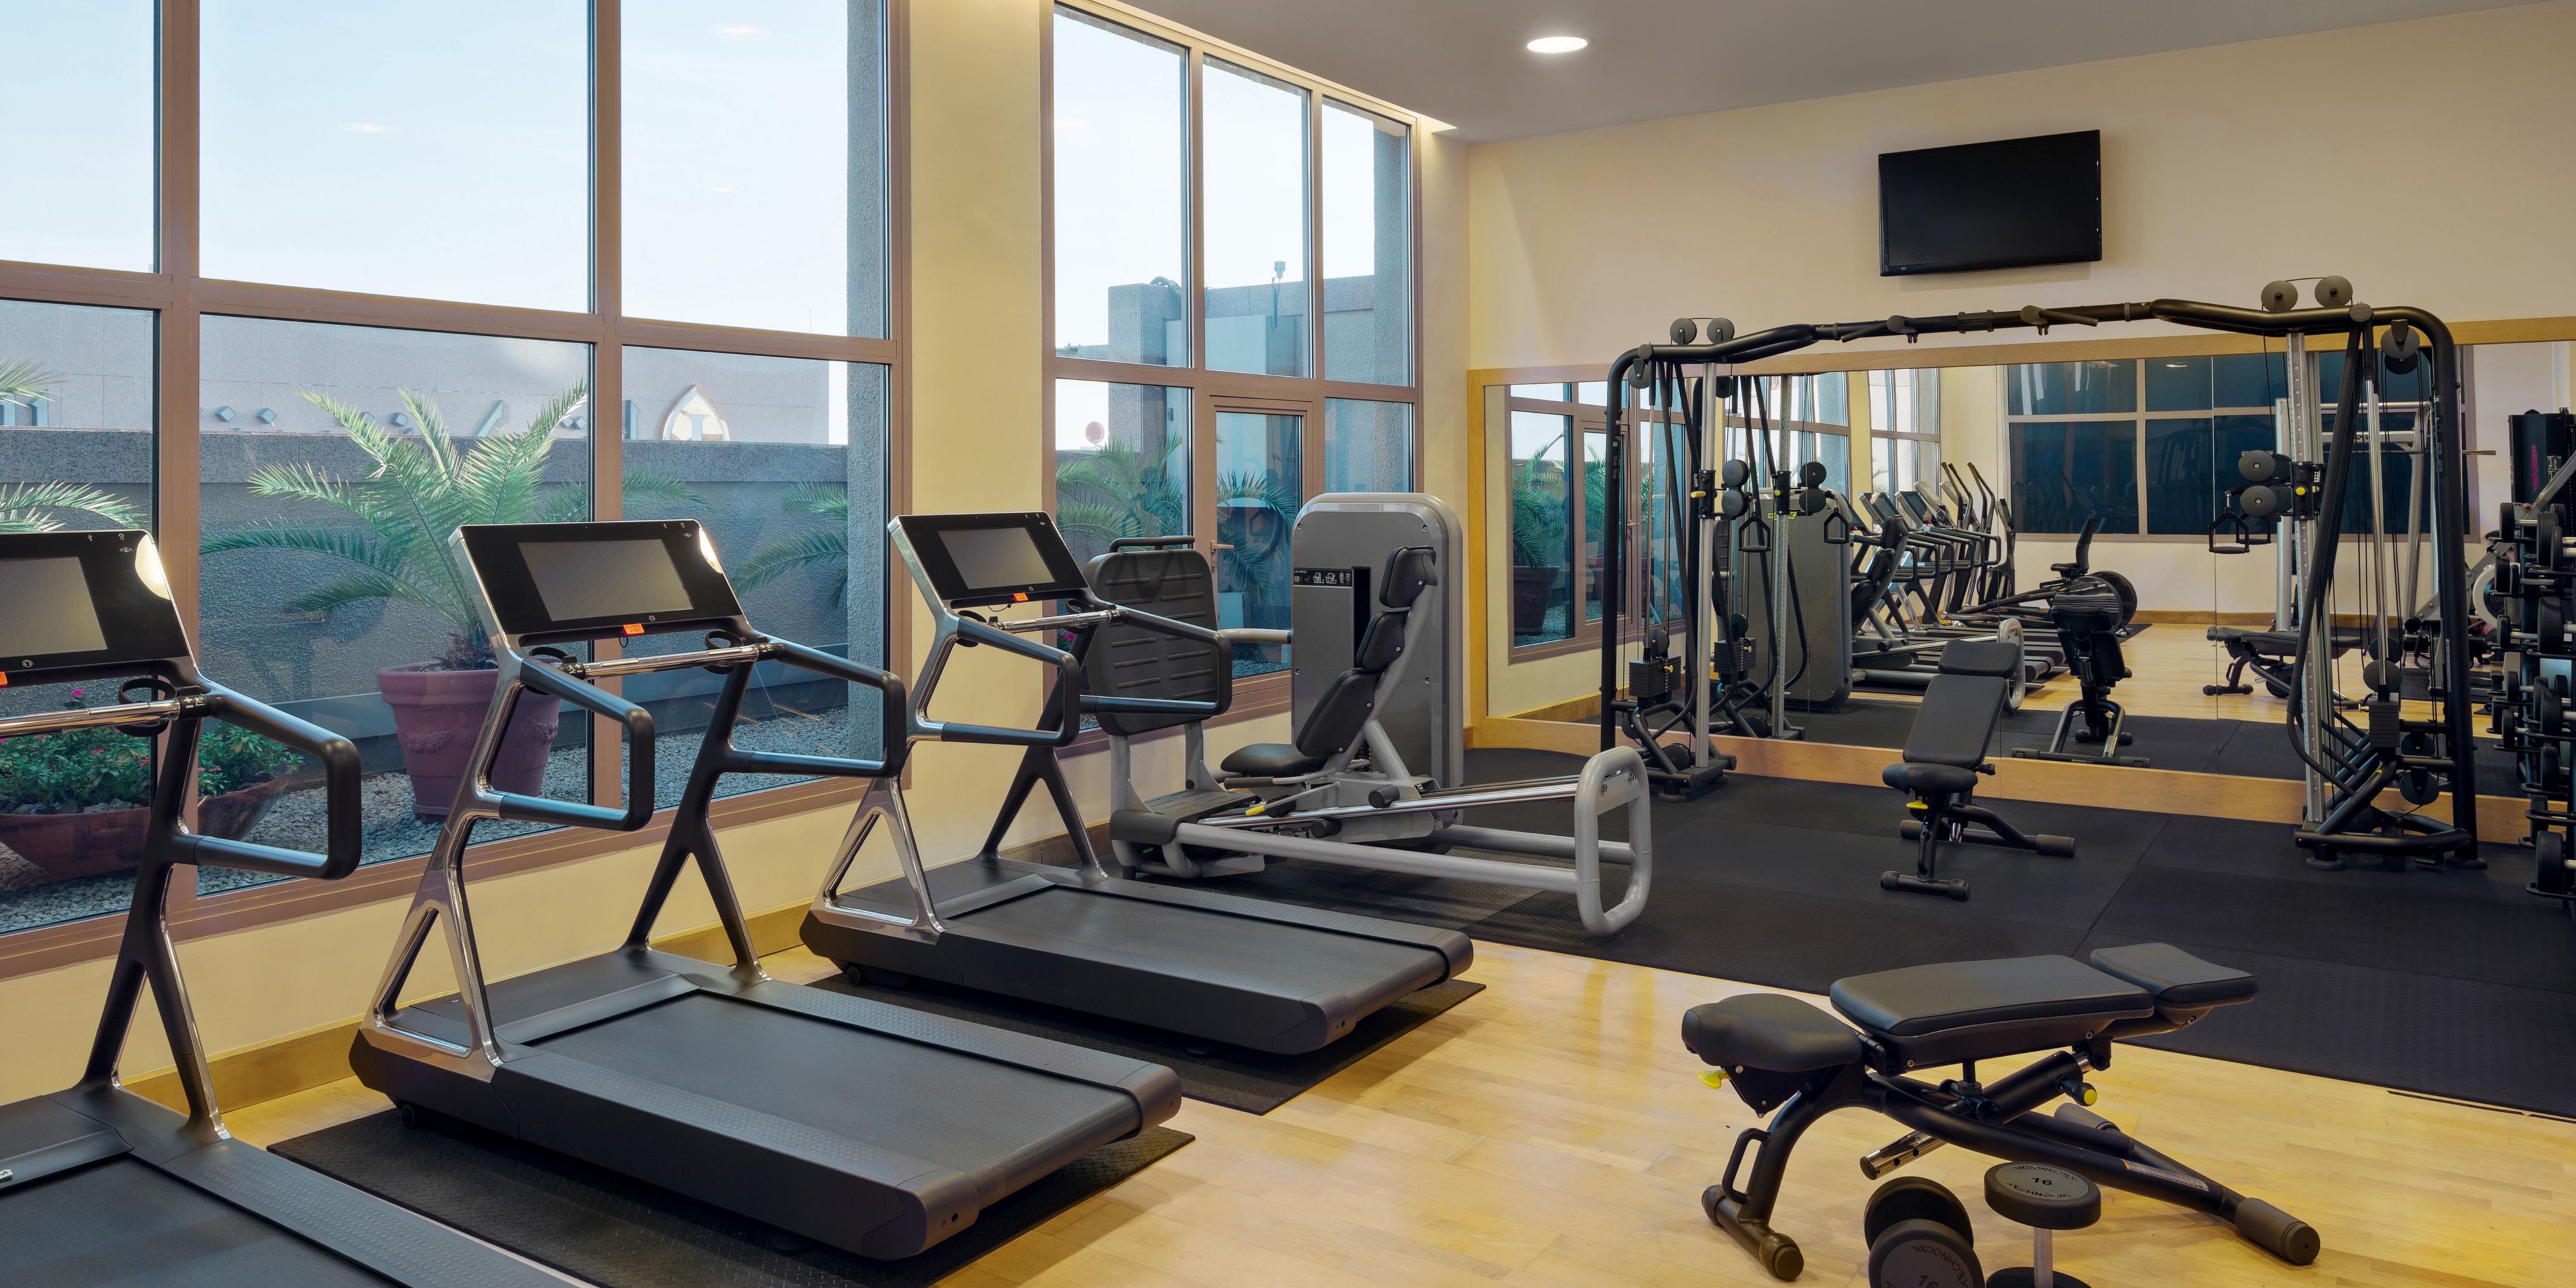 Keep your healthy lifestyle even when traveling for work and step up your fitness regime with our upgraded wellness facility, which features a fully equipped fitness center,  highly qualified personal trainers and spa therapists, aim to provide you with holistic experience during your stay.